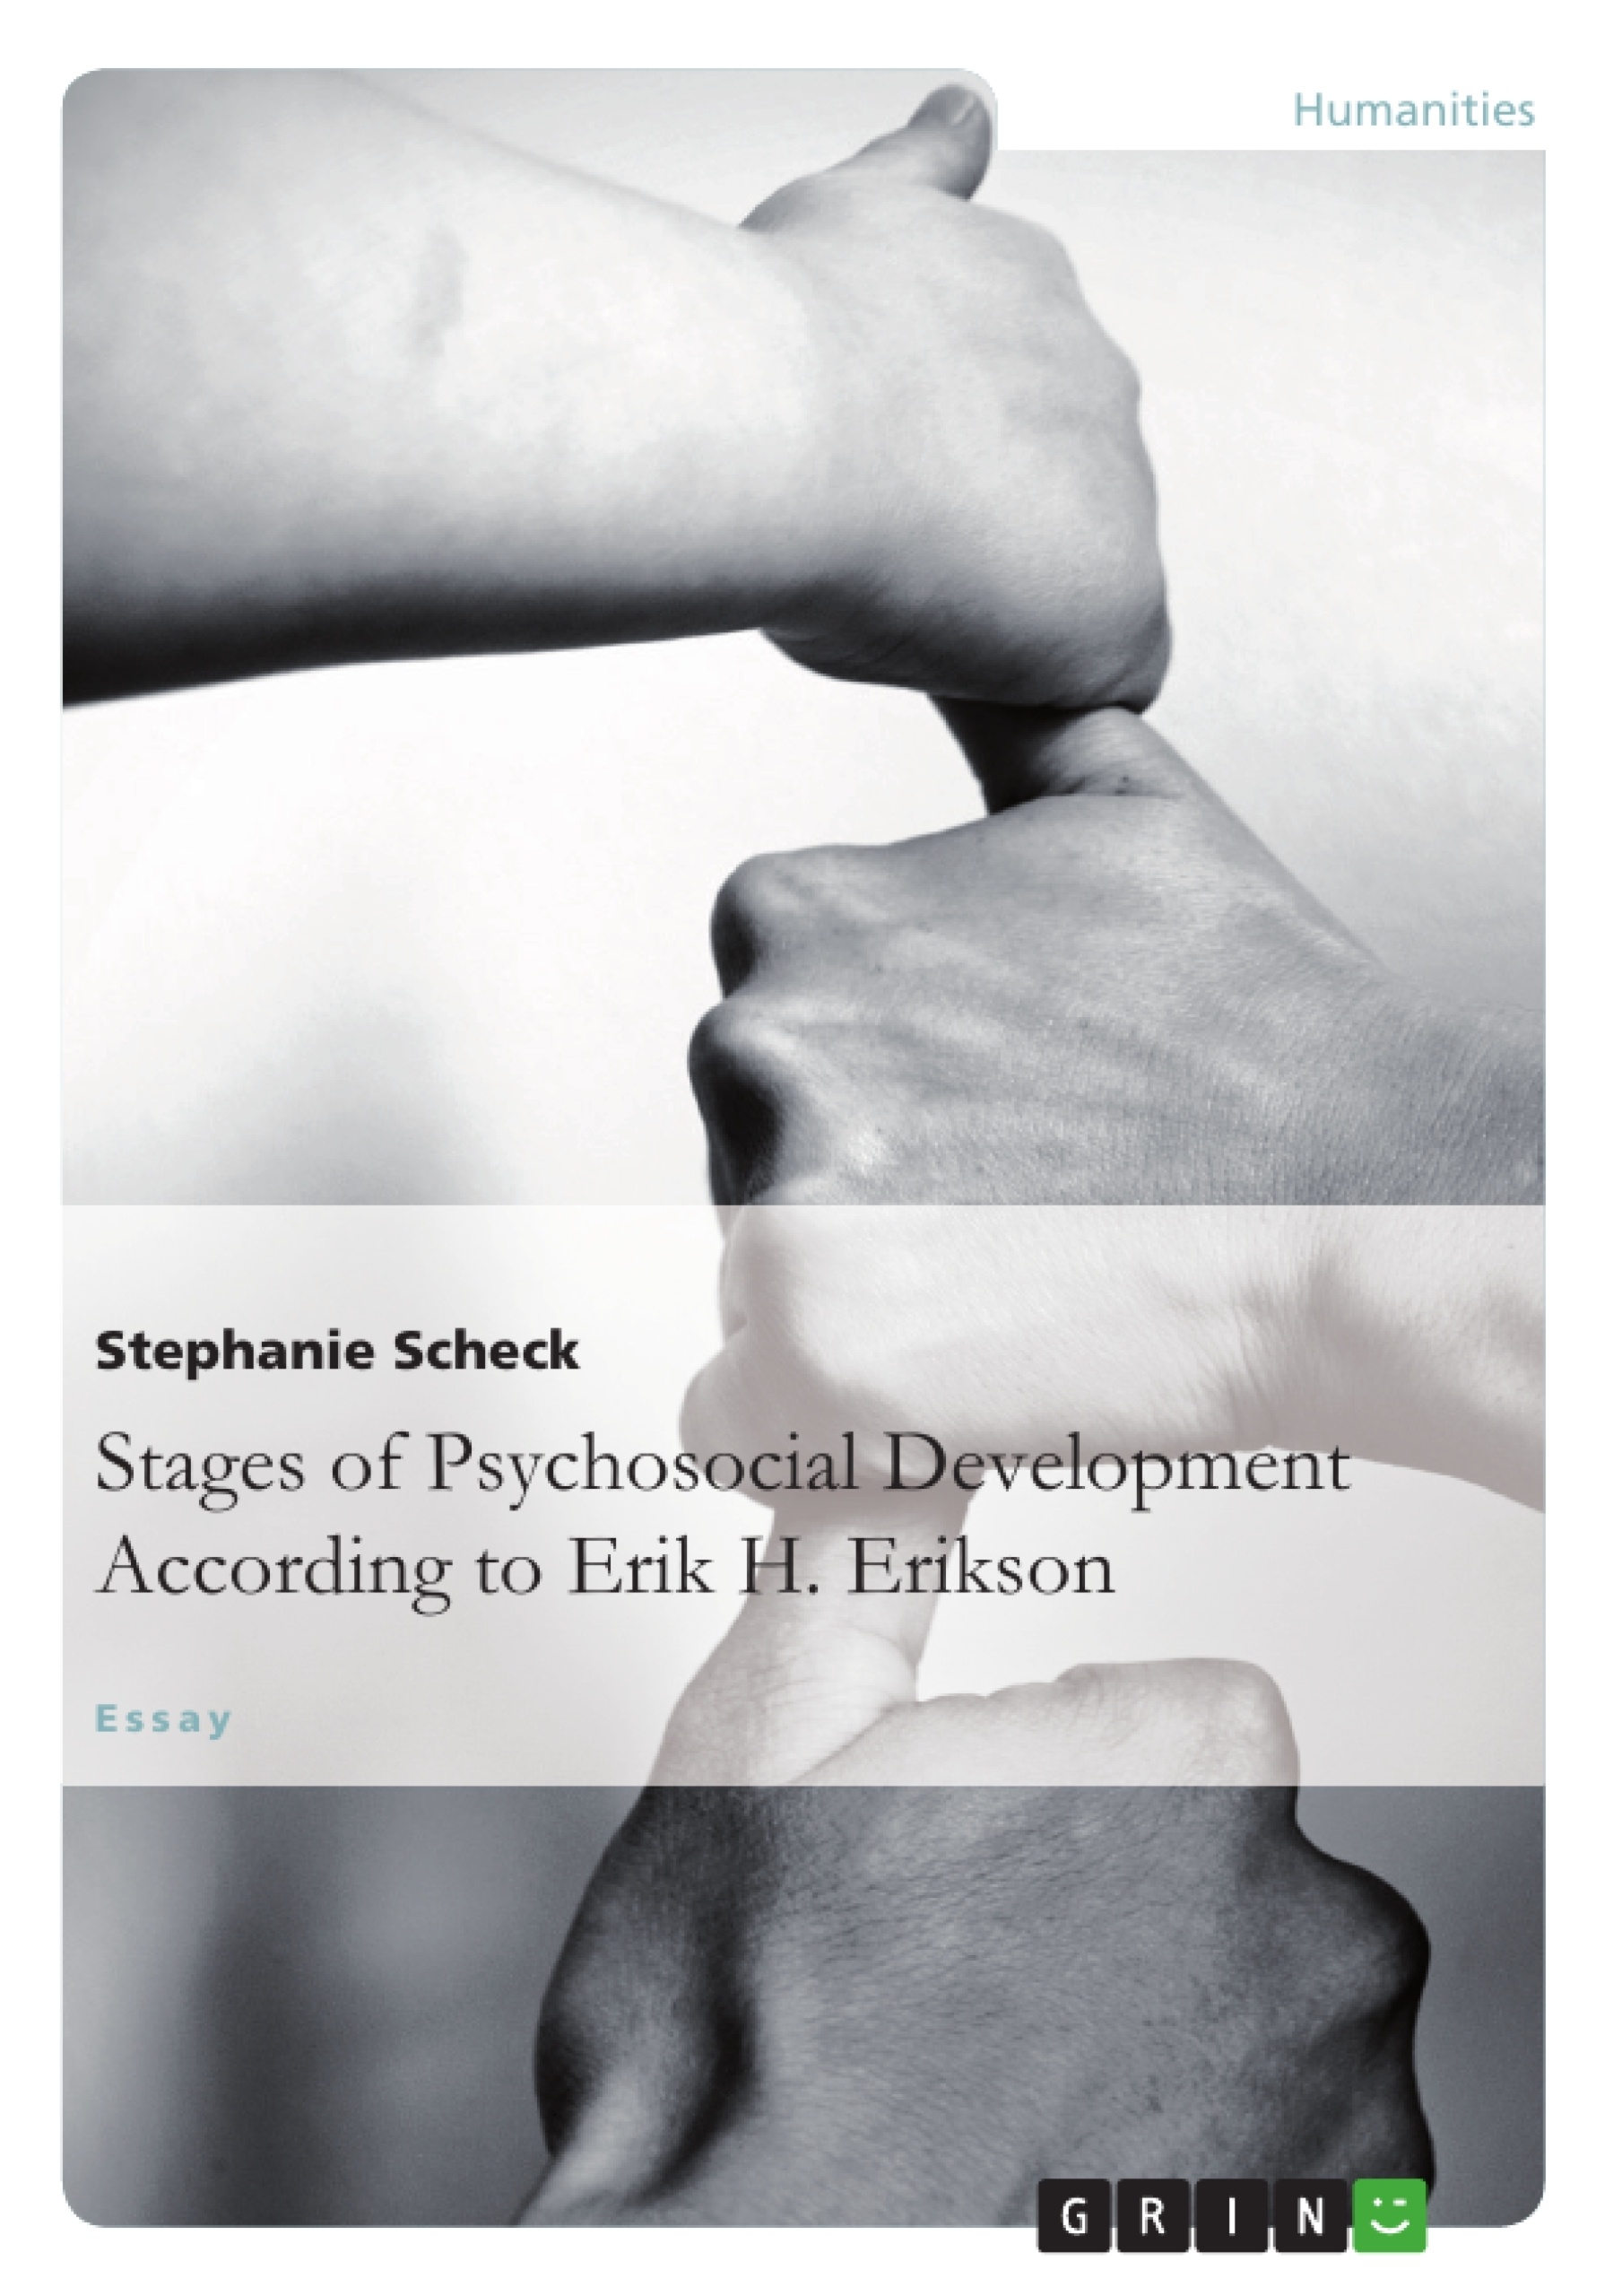 Title: The Stages of Psychosocial Development
According to Erik H. Erikson